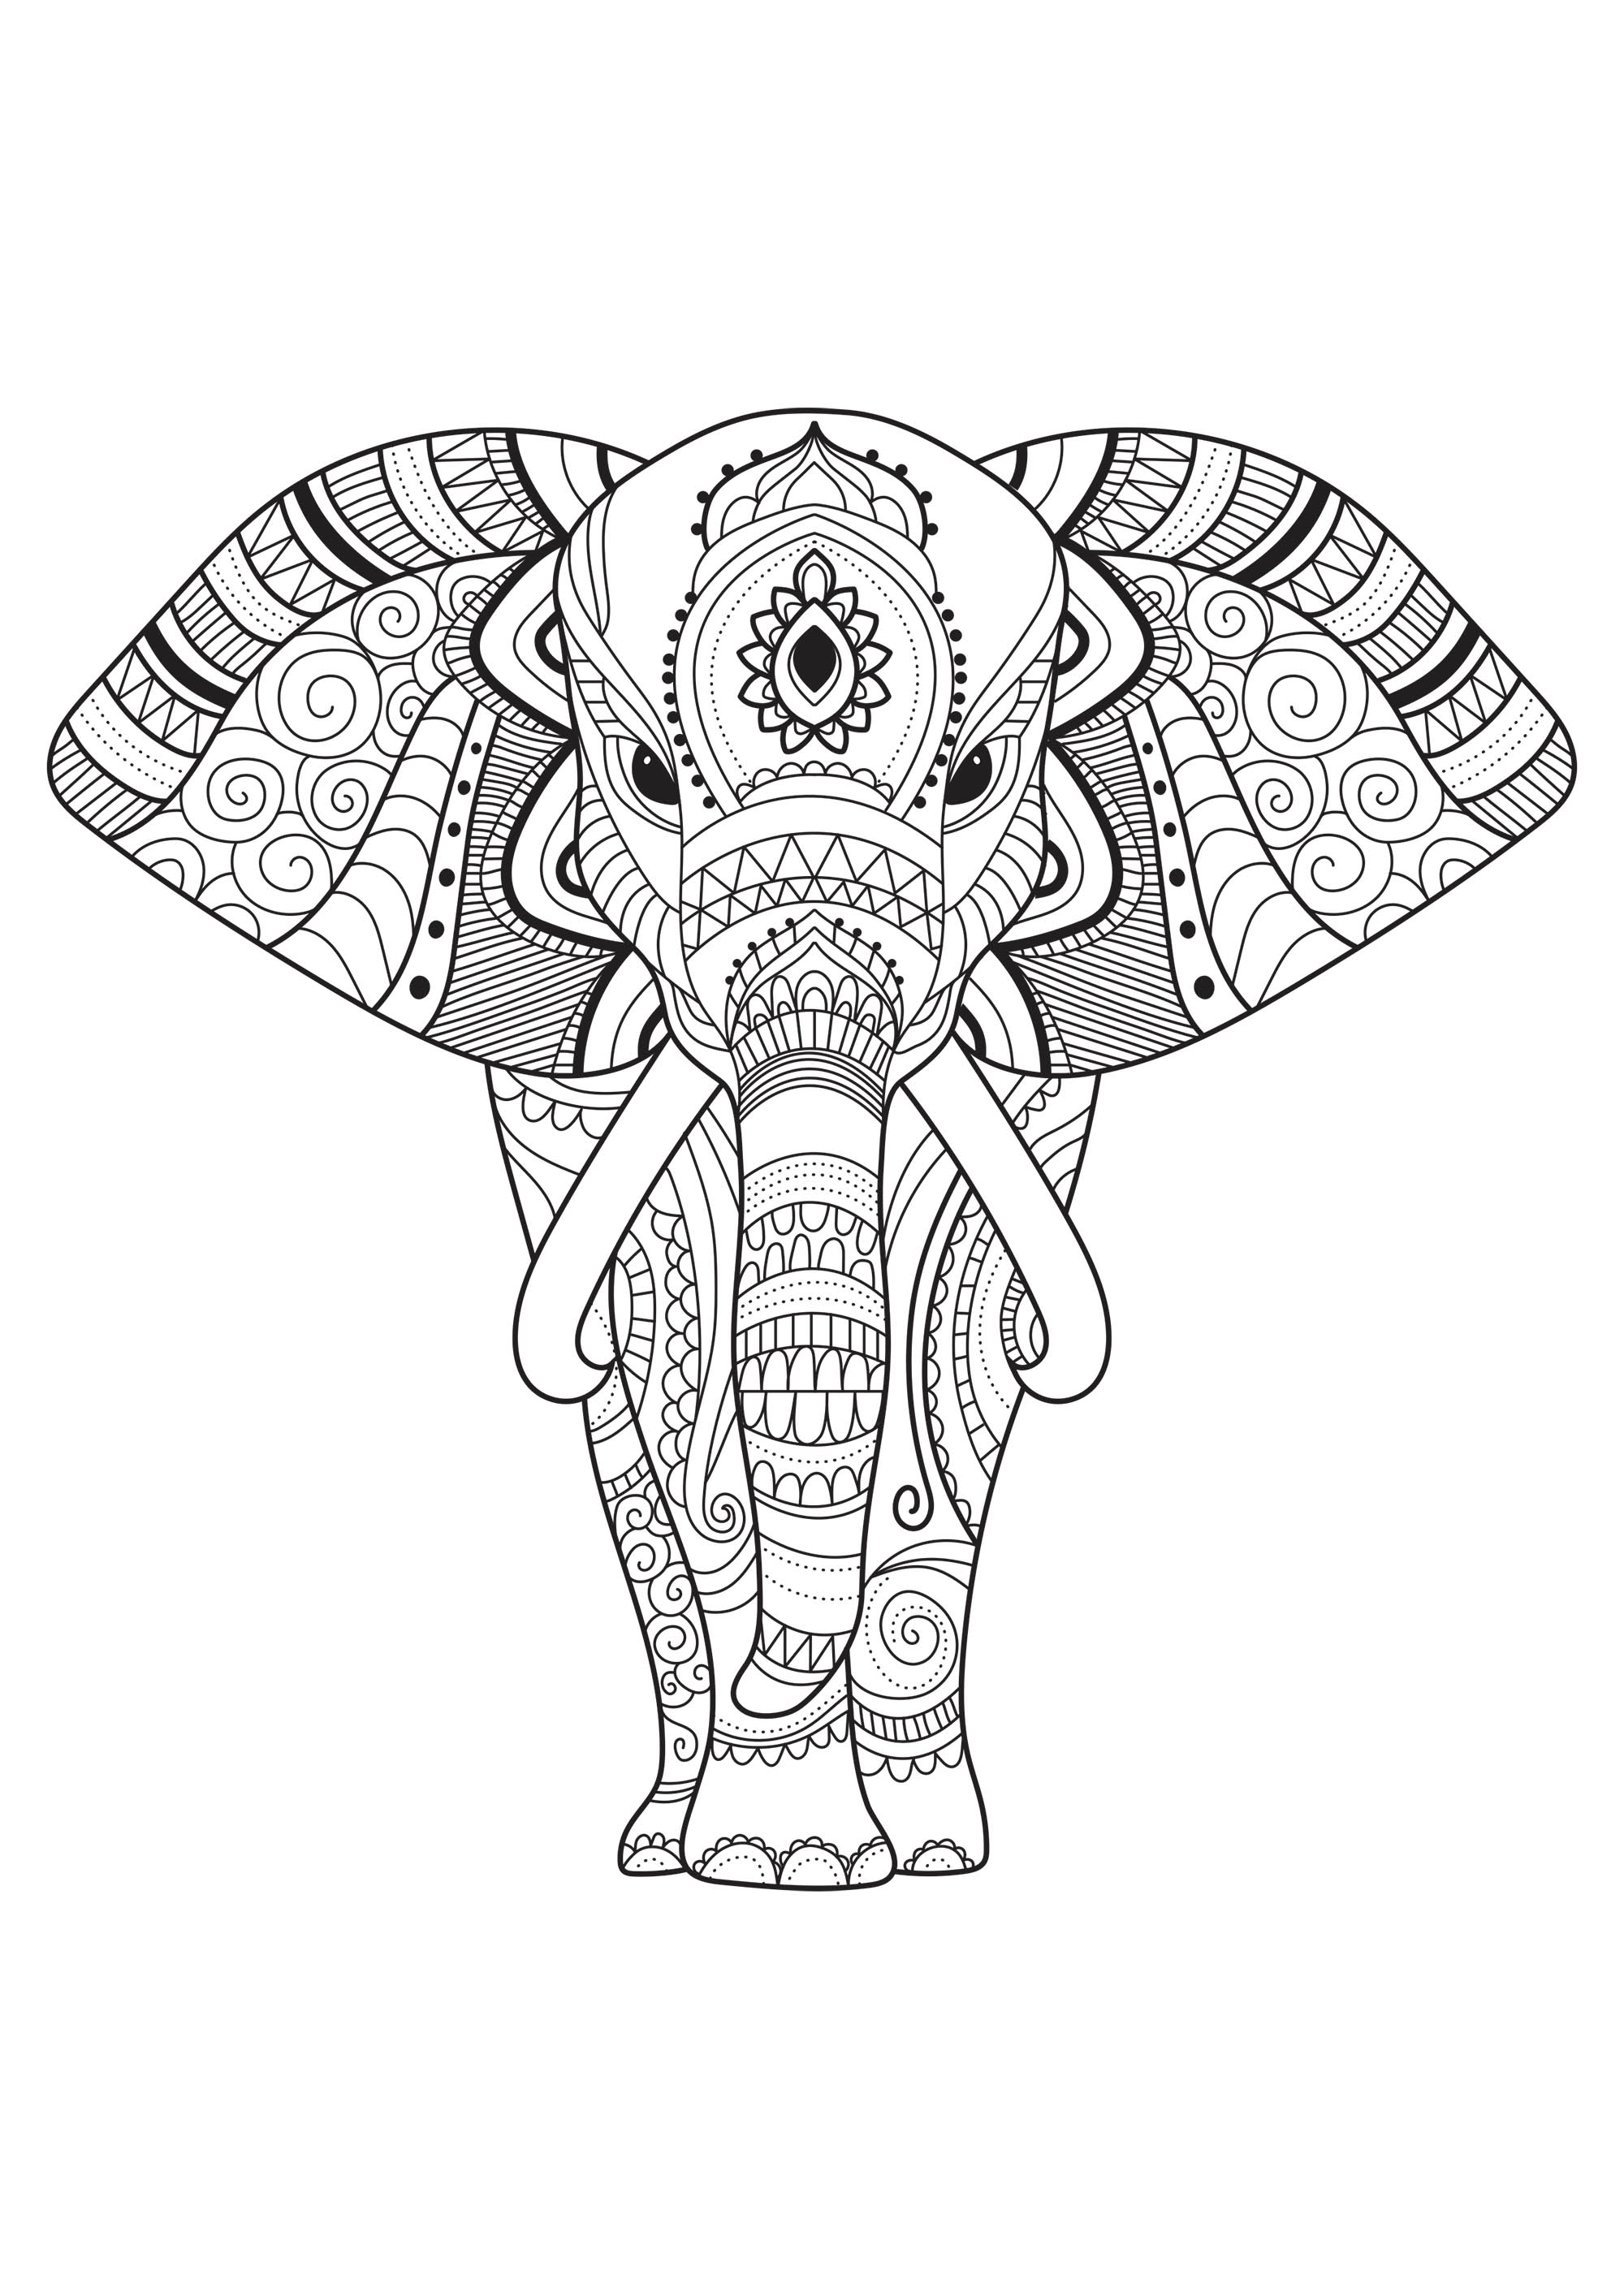 Elephant with simple patterns - Elephants Adult Coloring Pages